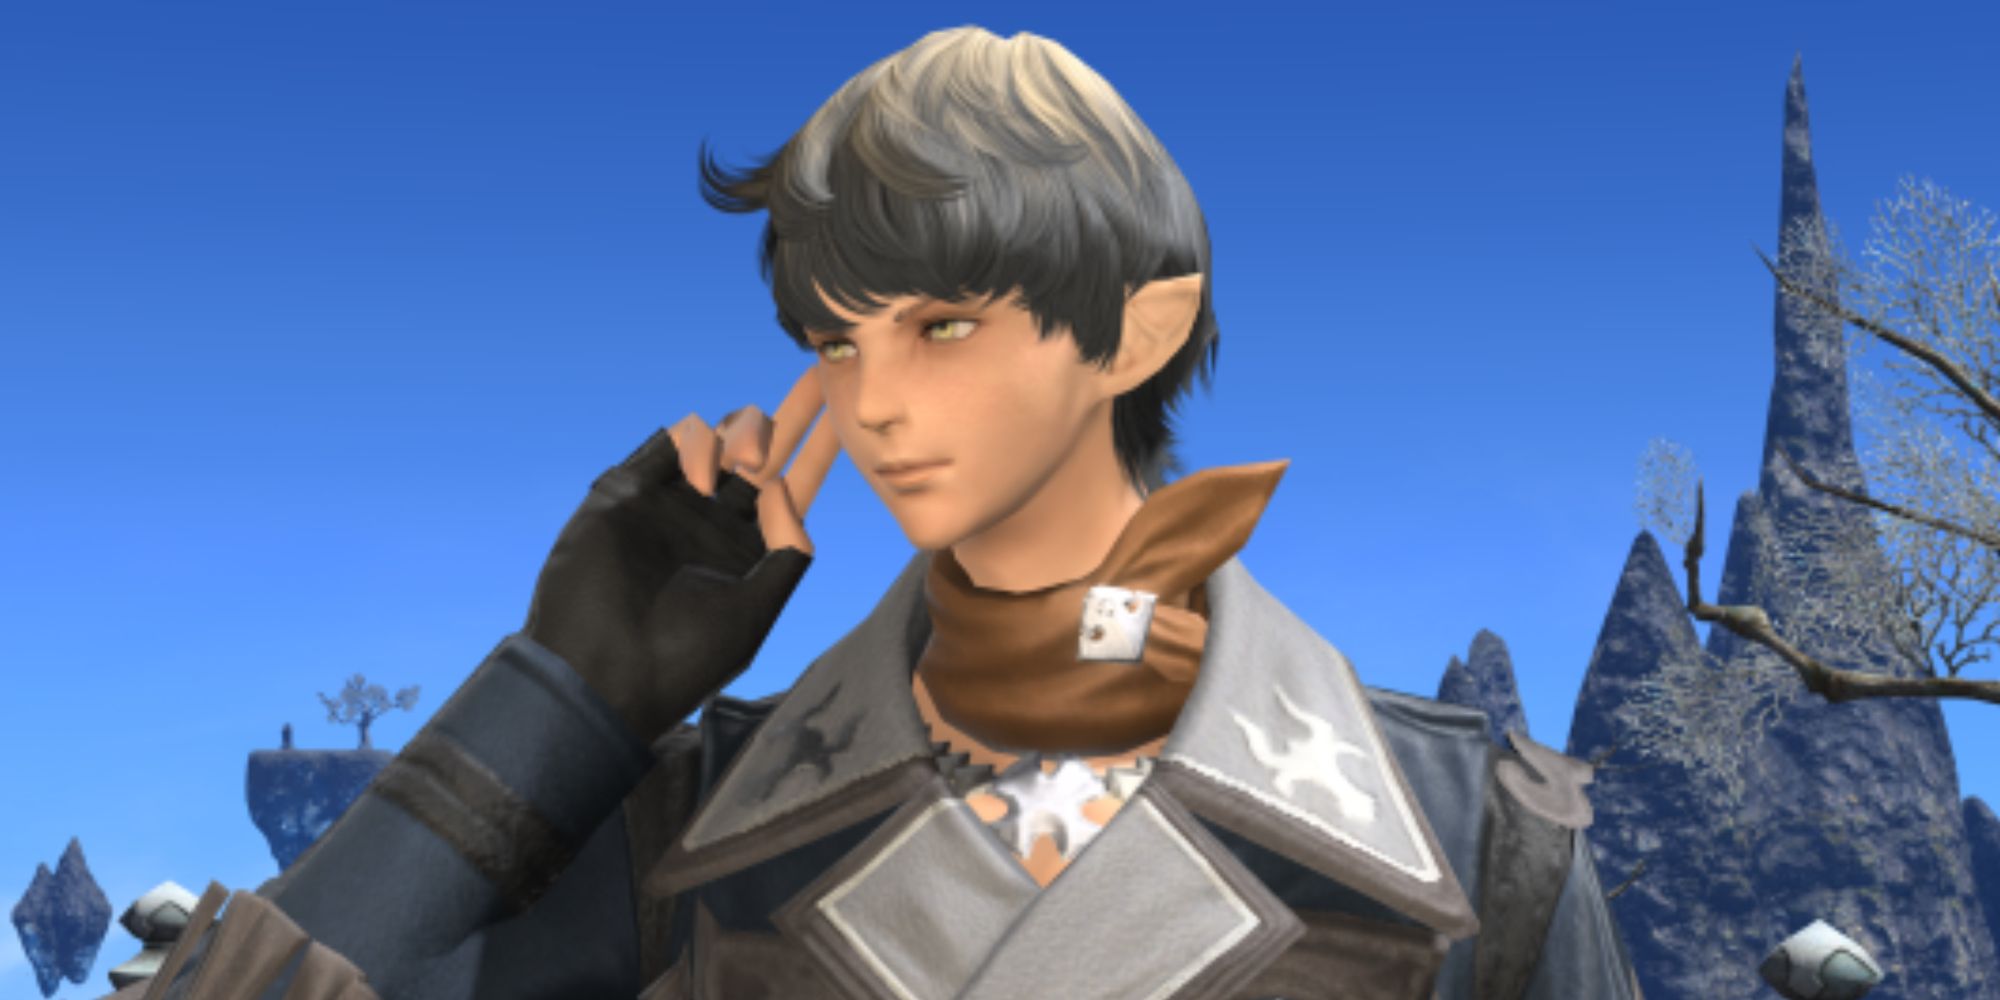 A Warrior of Light putting two fingers behind their ear to activate their Linkpearl, allowing them to communicate to others with a Linkpearl. This is a new Emote available in PvP Series 3 of Final Fantasy 14.